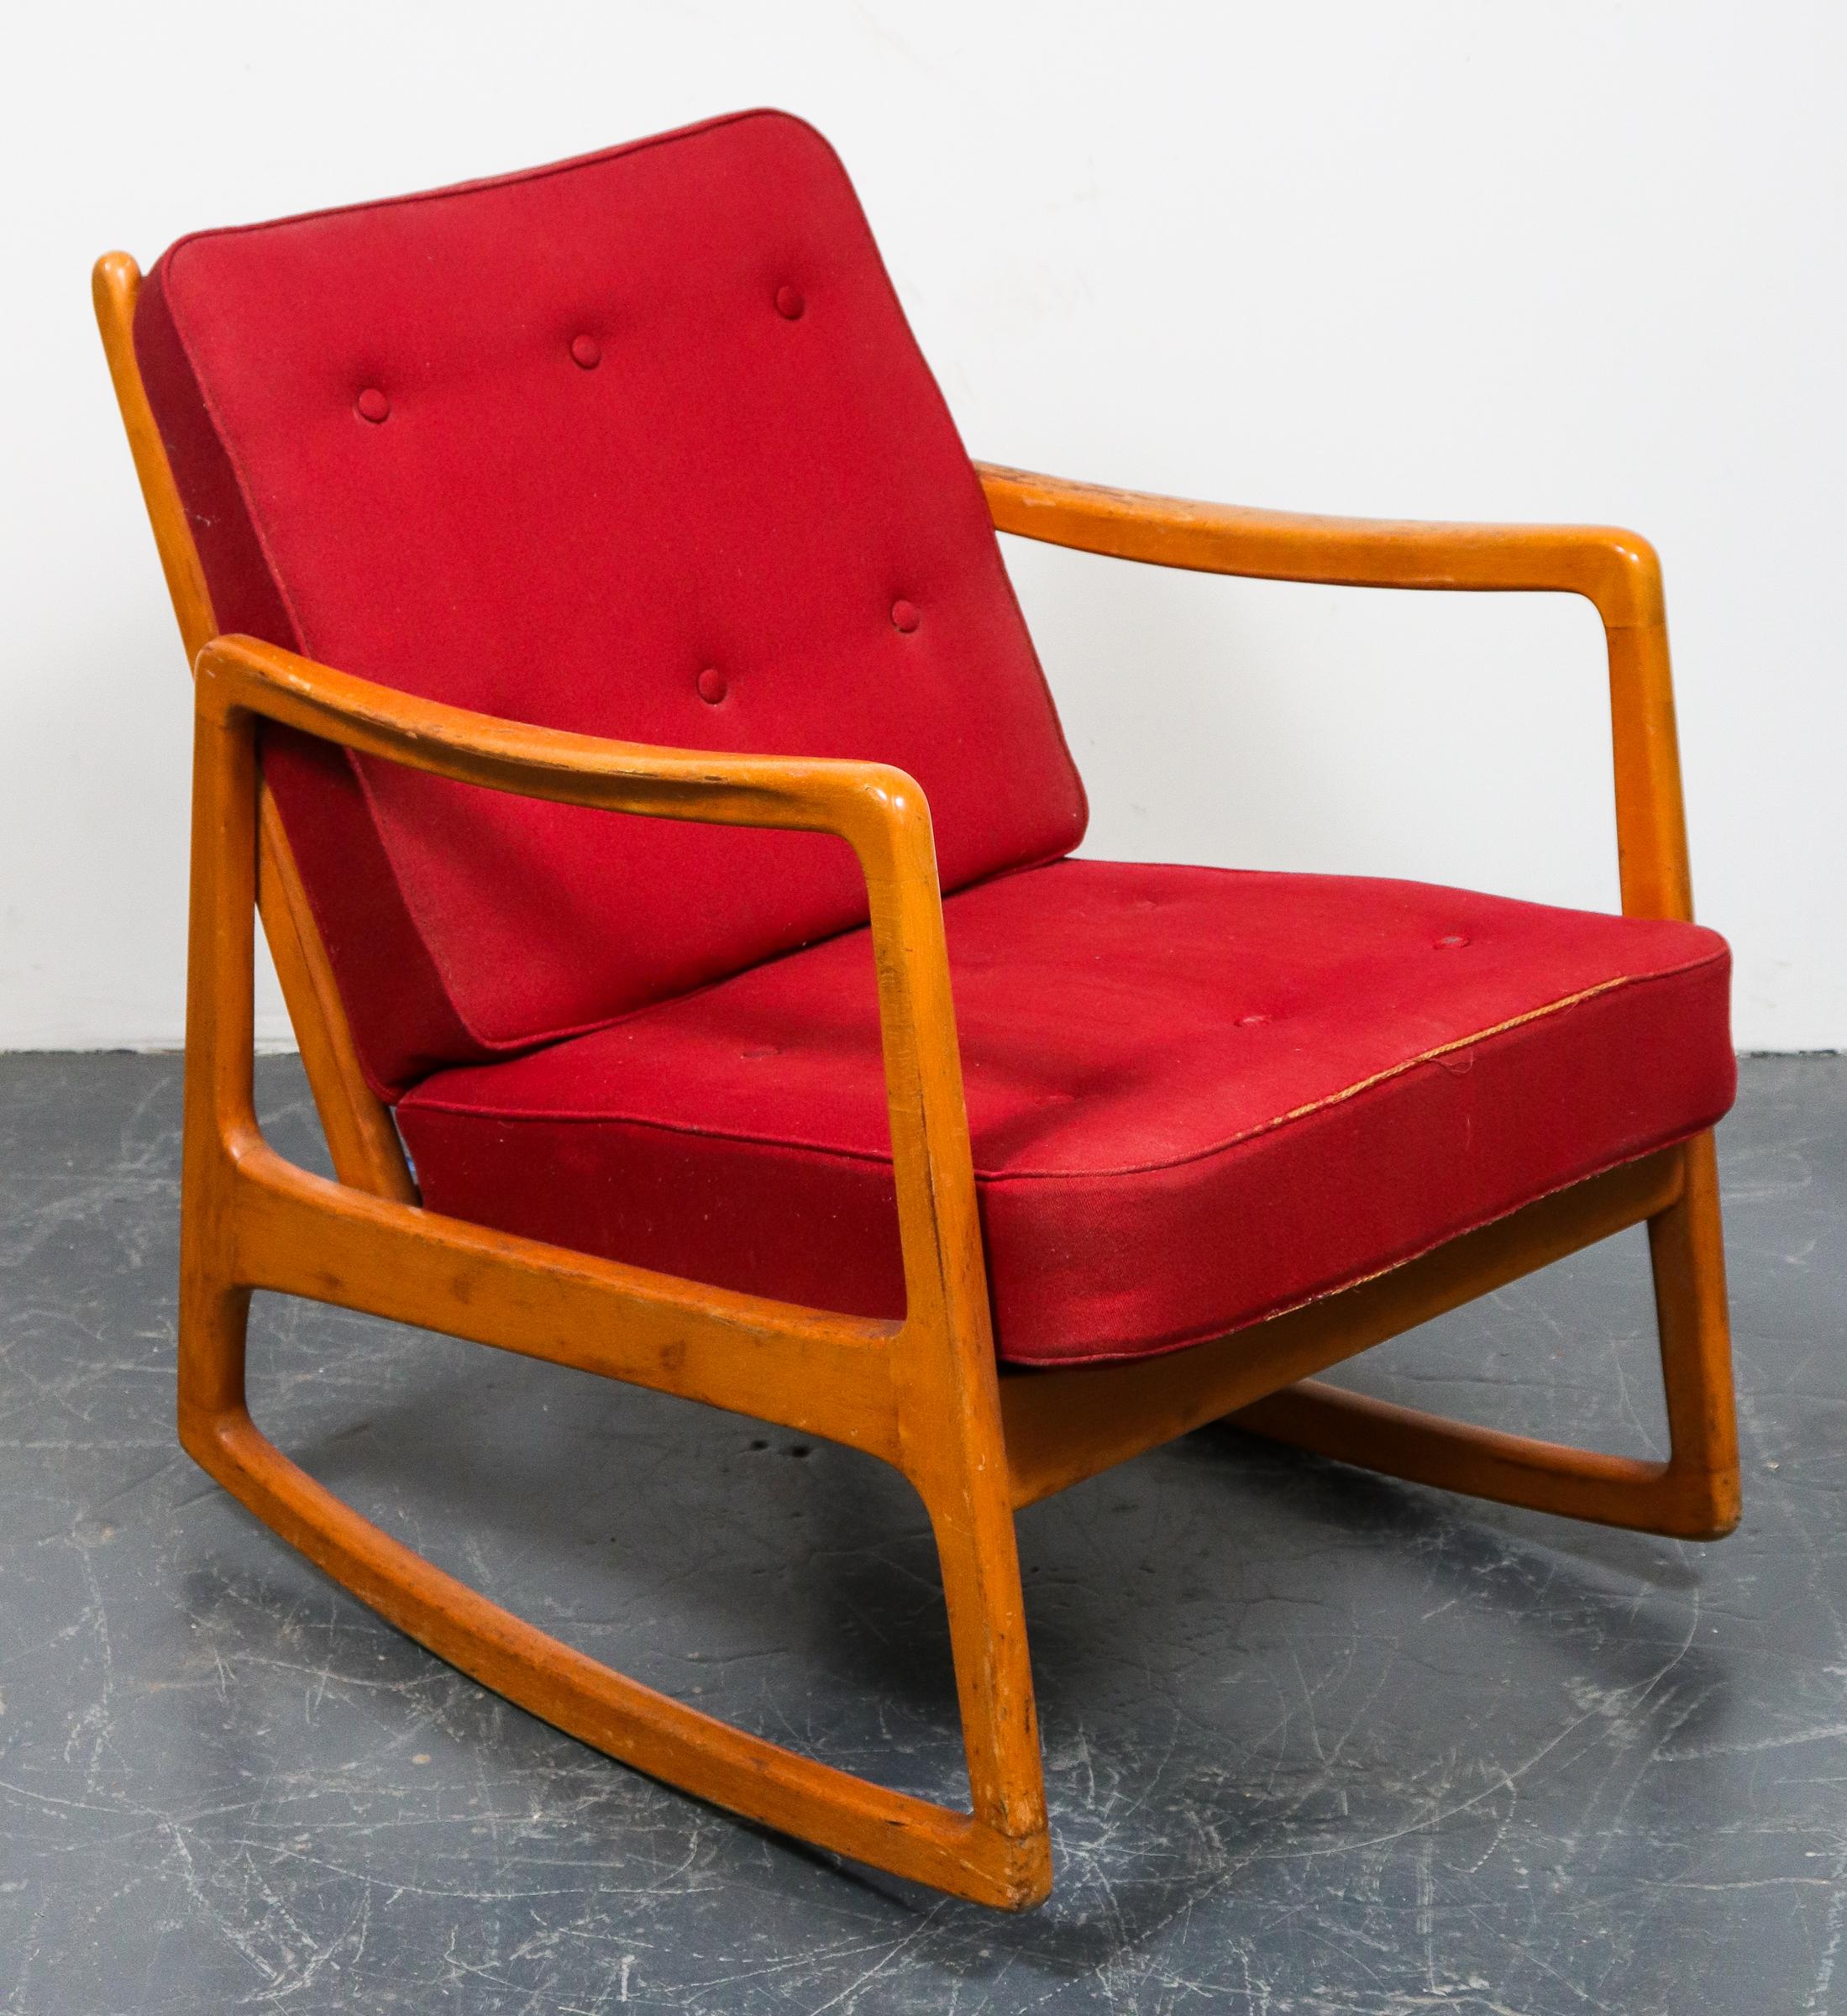 John Stuart American Mid-Century Modern rocking chair, wood frame with red tufted upholstered cushion seat and back, label affixed to frame. Measures: 29.5